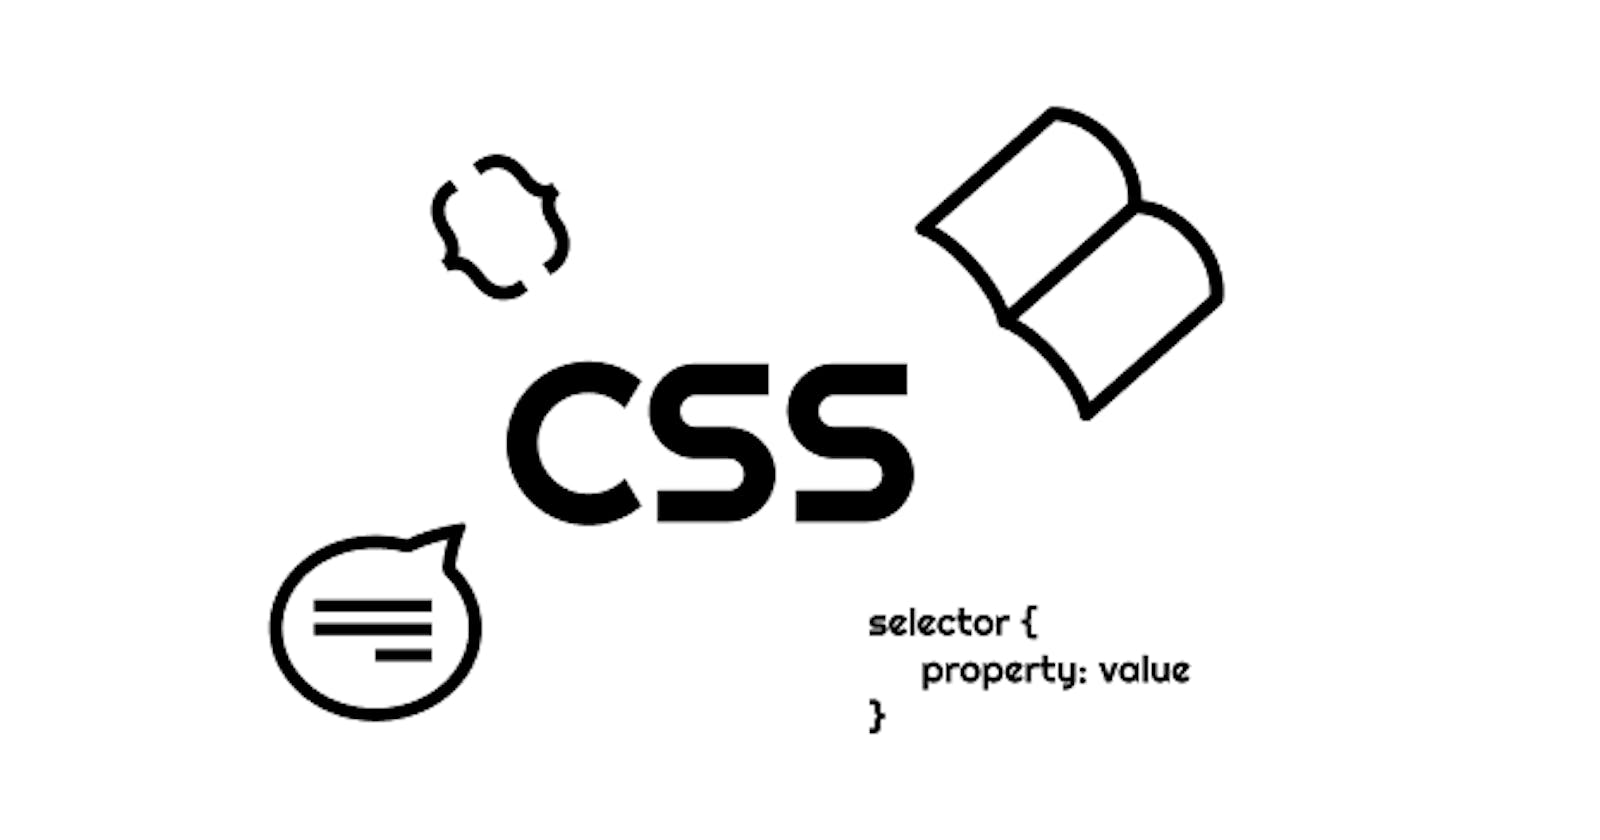 Some CSS theories and declarations I didn't know before